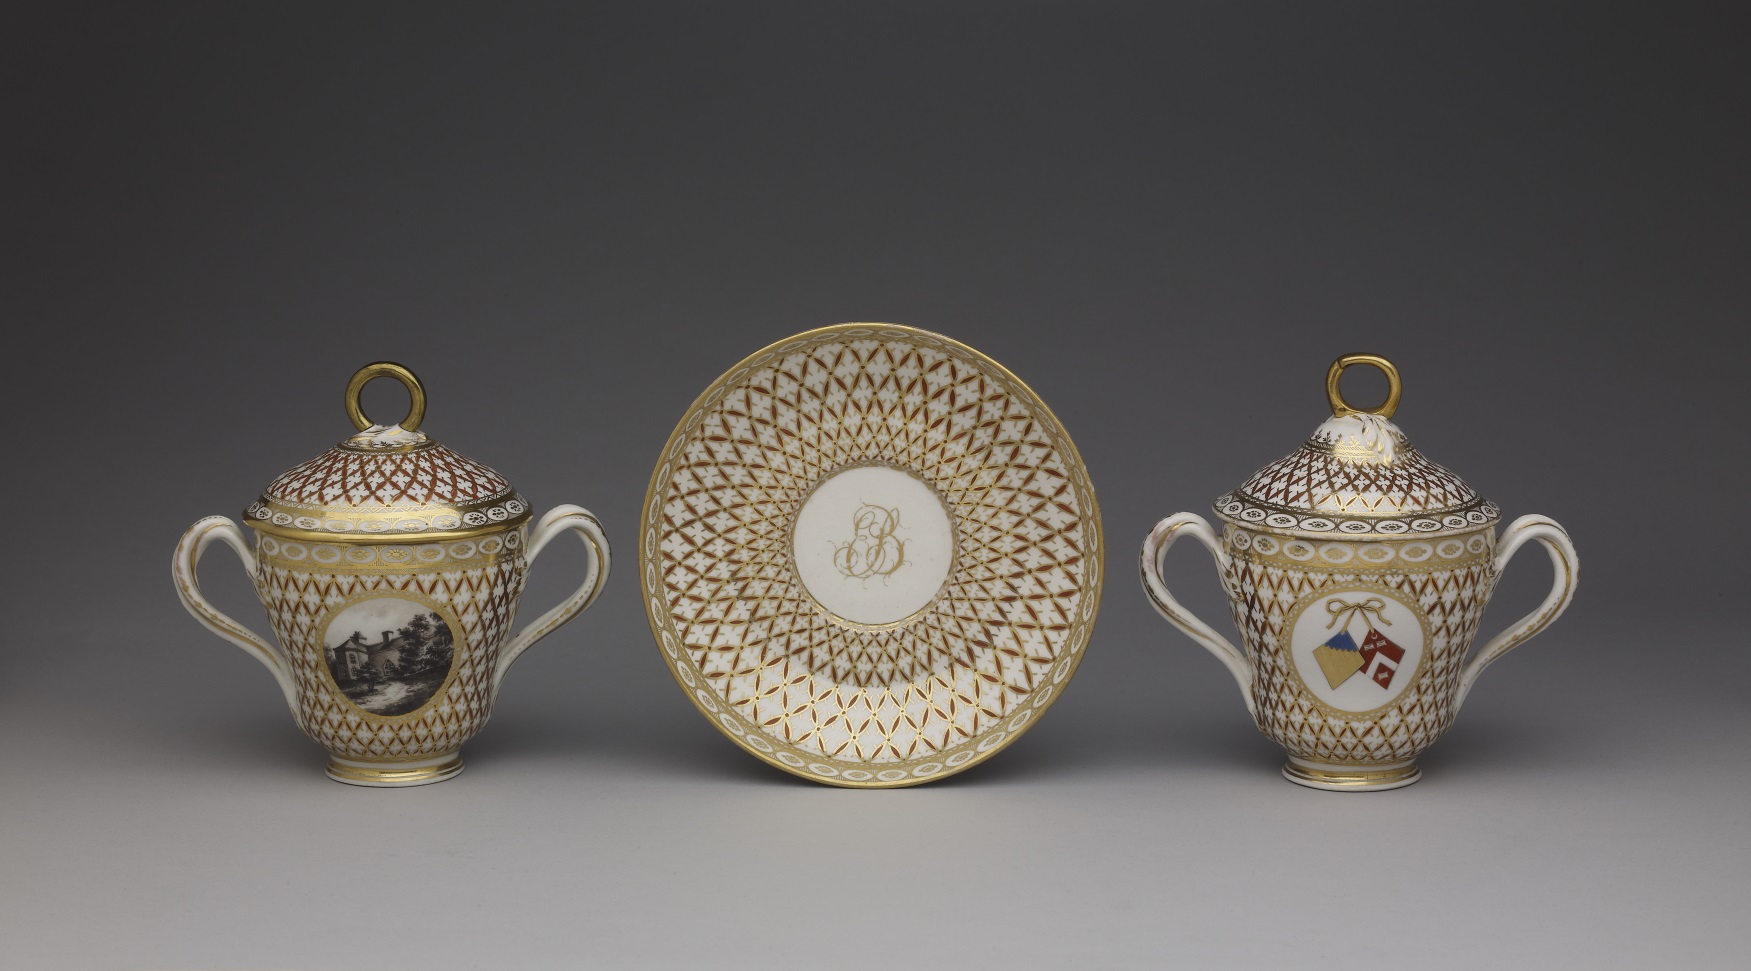 Pair of chocolate-cups, covers and saucers, 1779-1781 (The Trustees of the British Museum)